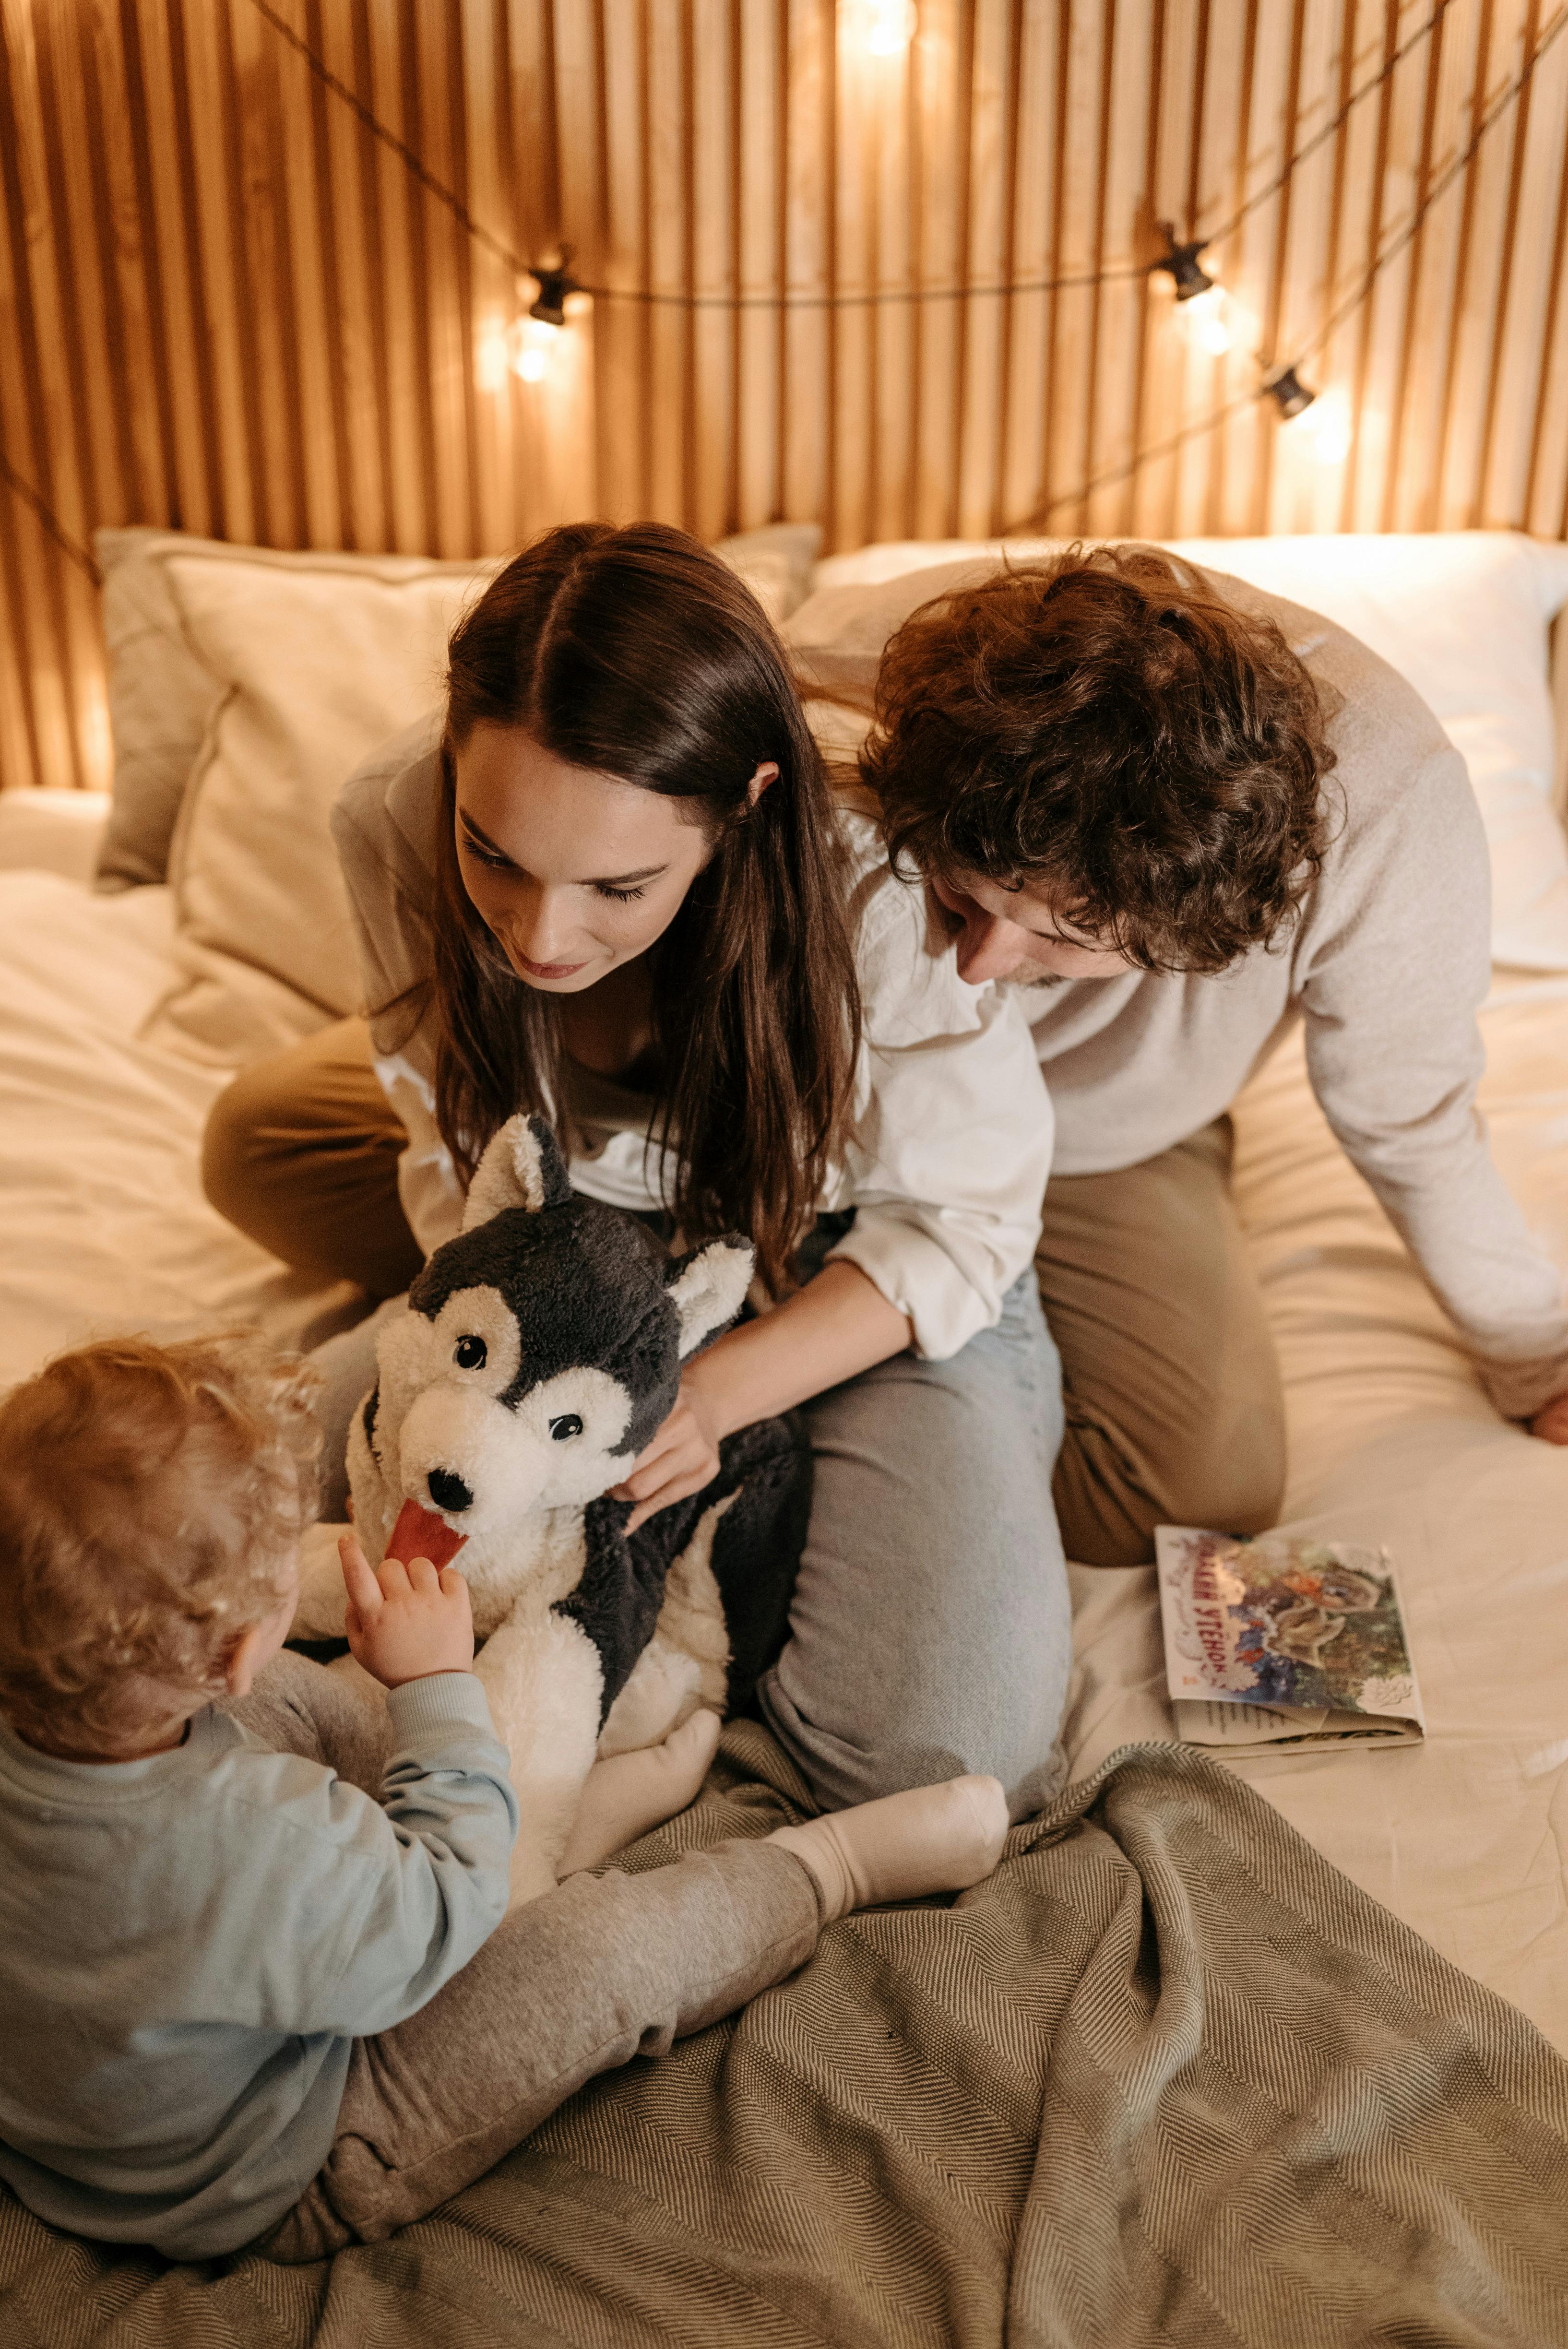 A happy couple playing with a child | Source: Pexels